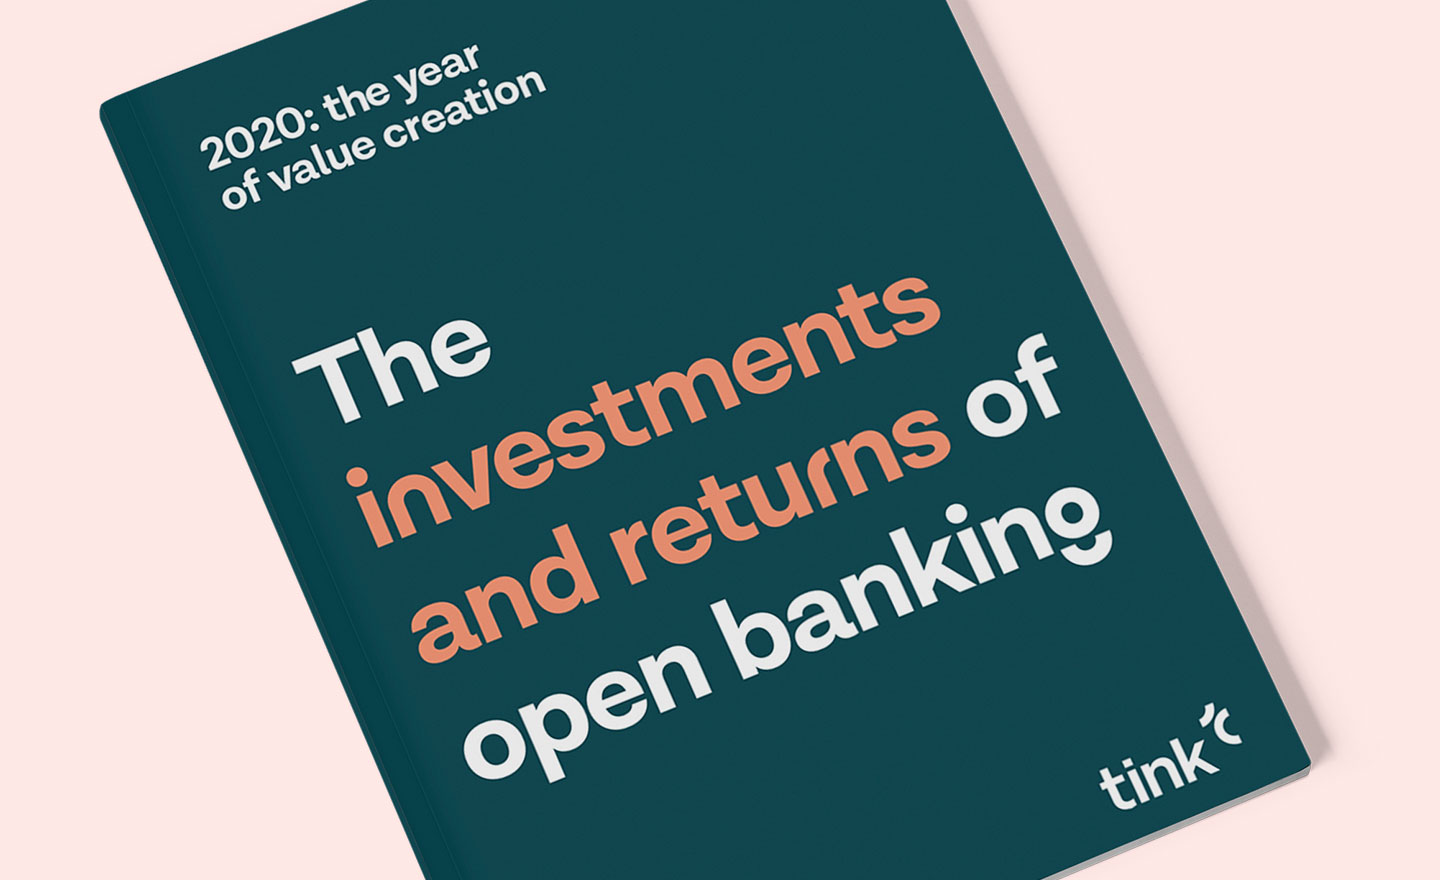 The investments and returns of open banking